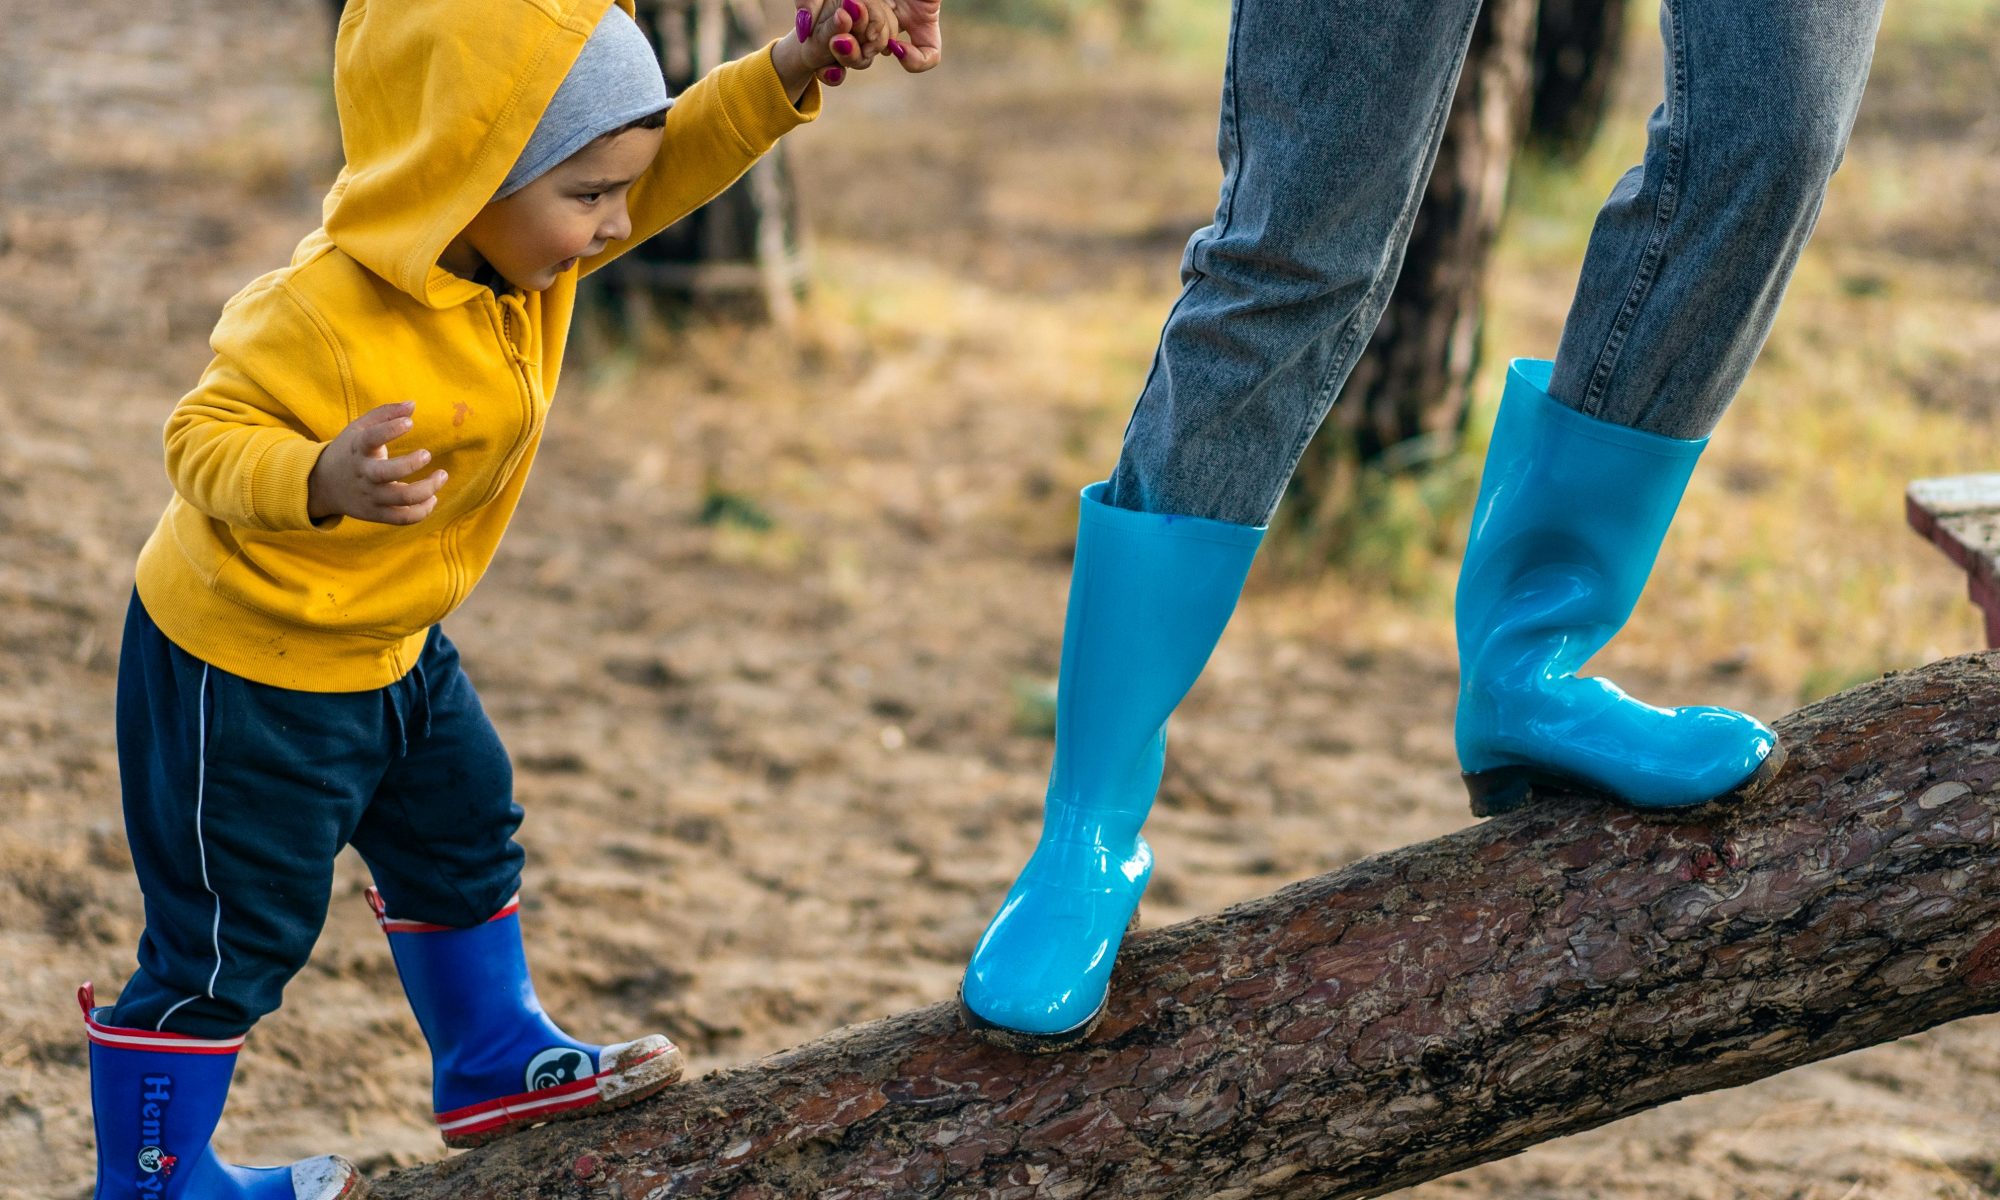 parent-leads-small-child-in-blue-rainboots-on-climb-up-fallen-tree-trunk